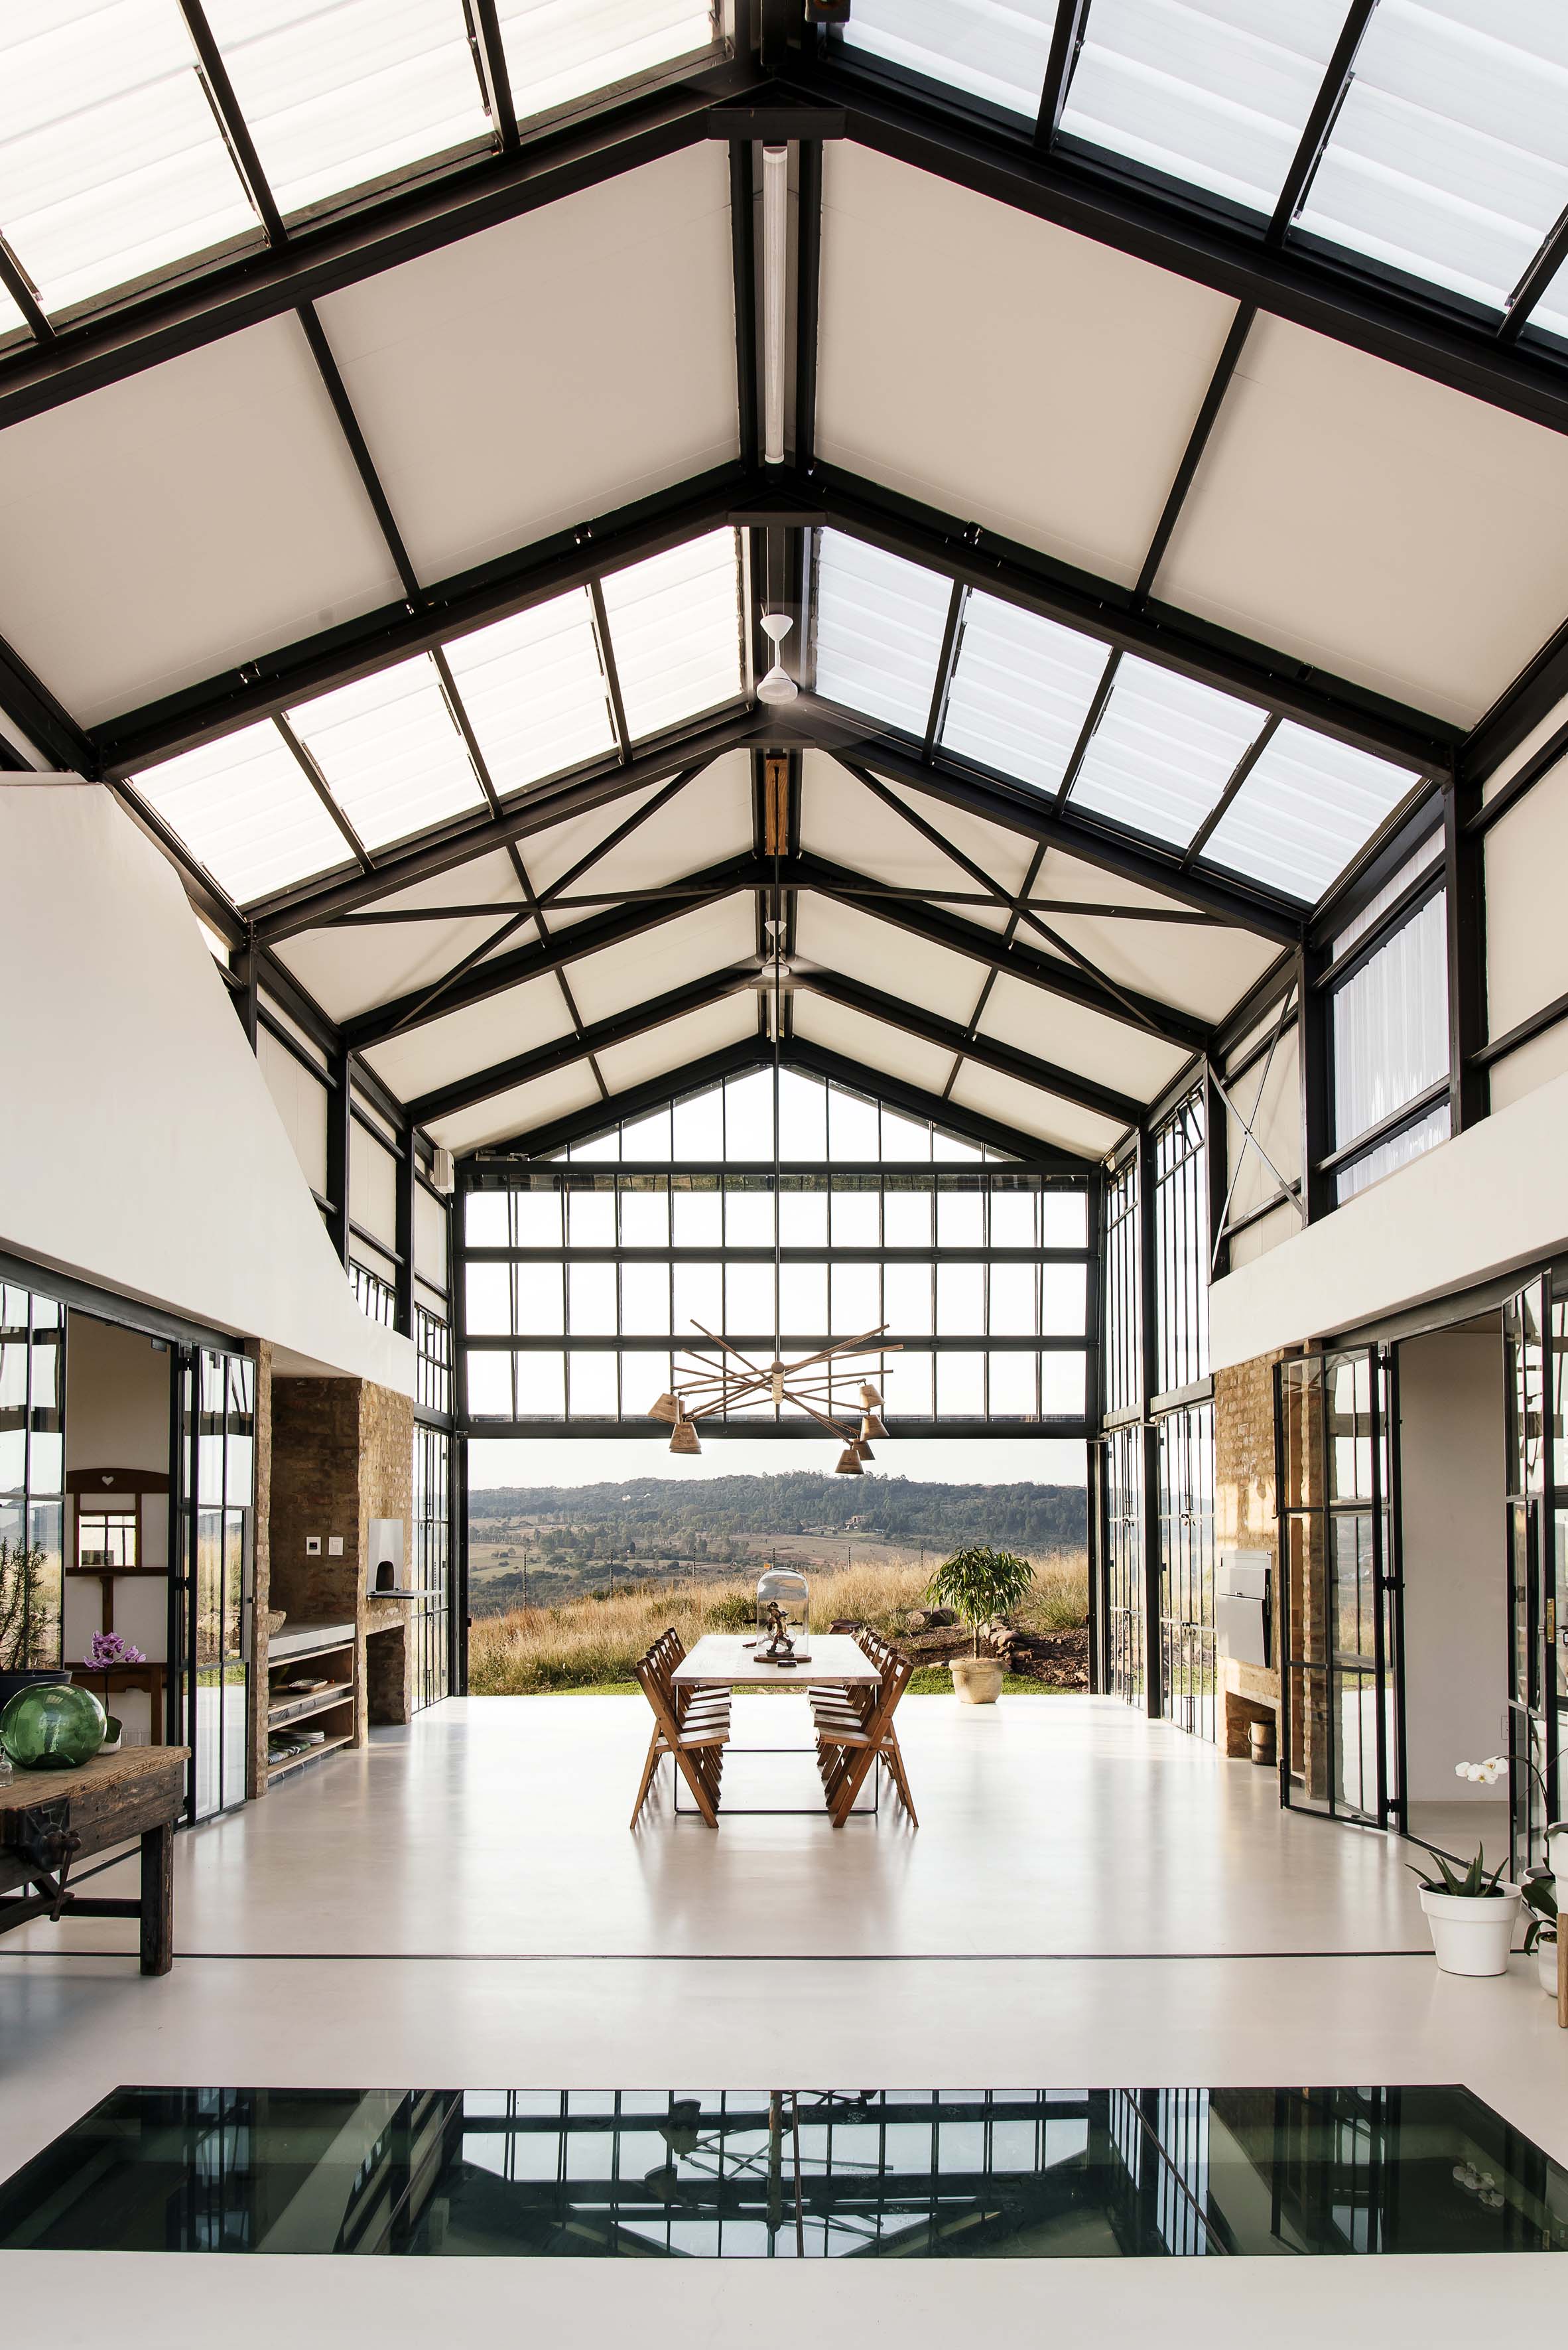 Interiors of Conservatory House by Nadine Englebrecht in South Africa